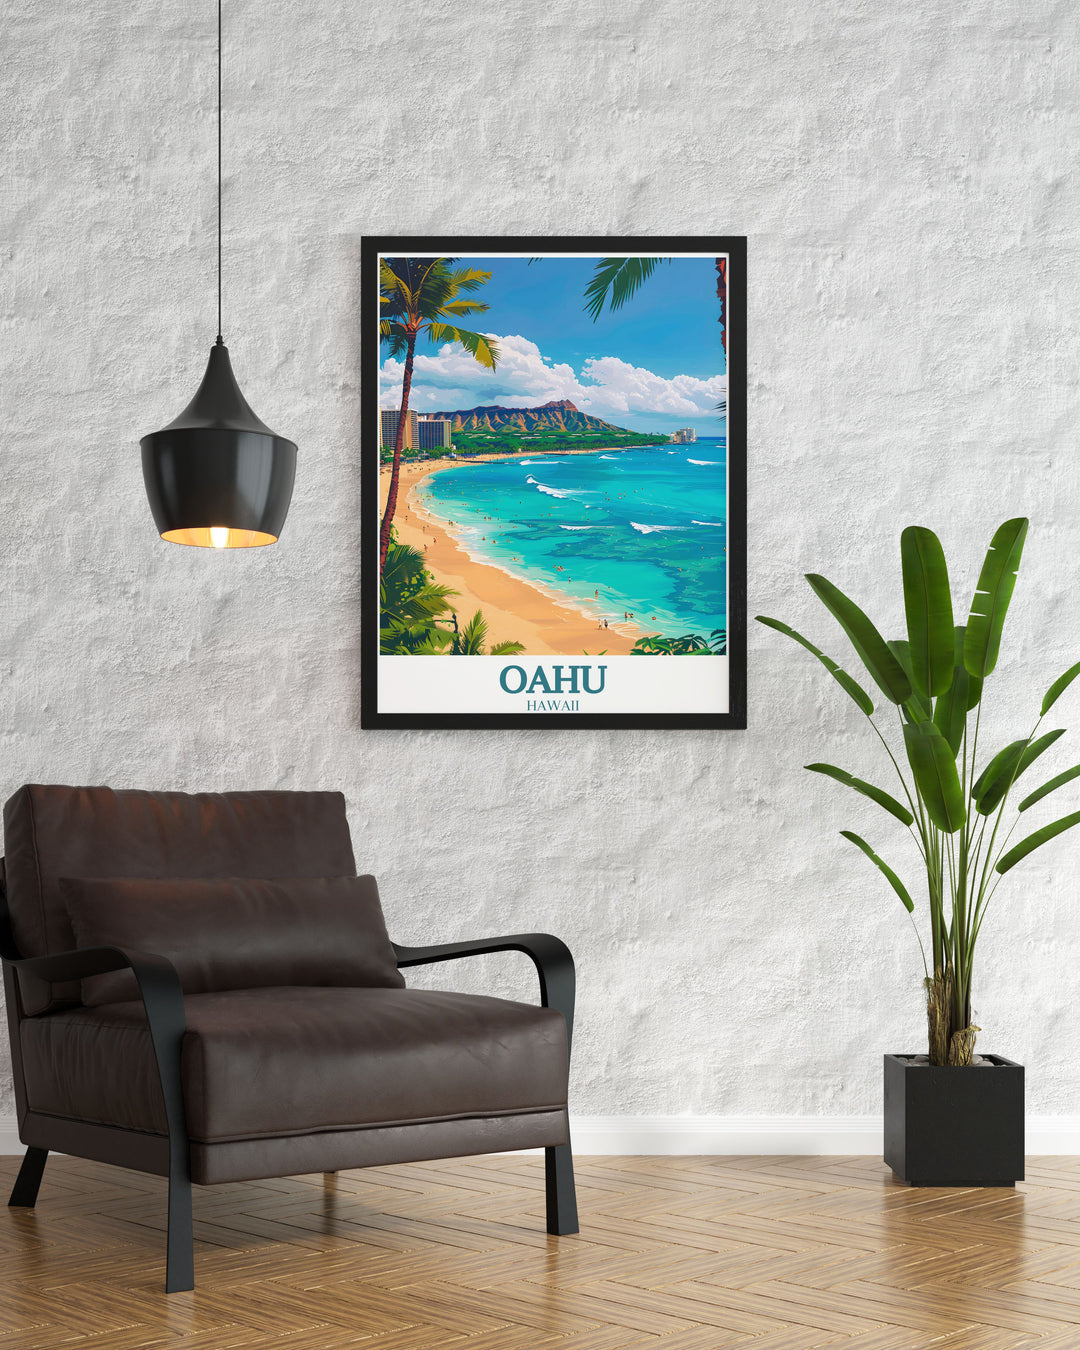 Transform your walls with this stunning Oahu travel poster featuring the picturesque Waikiki Beach and Diamond Head Crater perfect for lovers of tropical destinations.